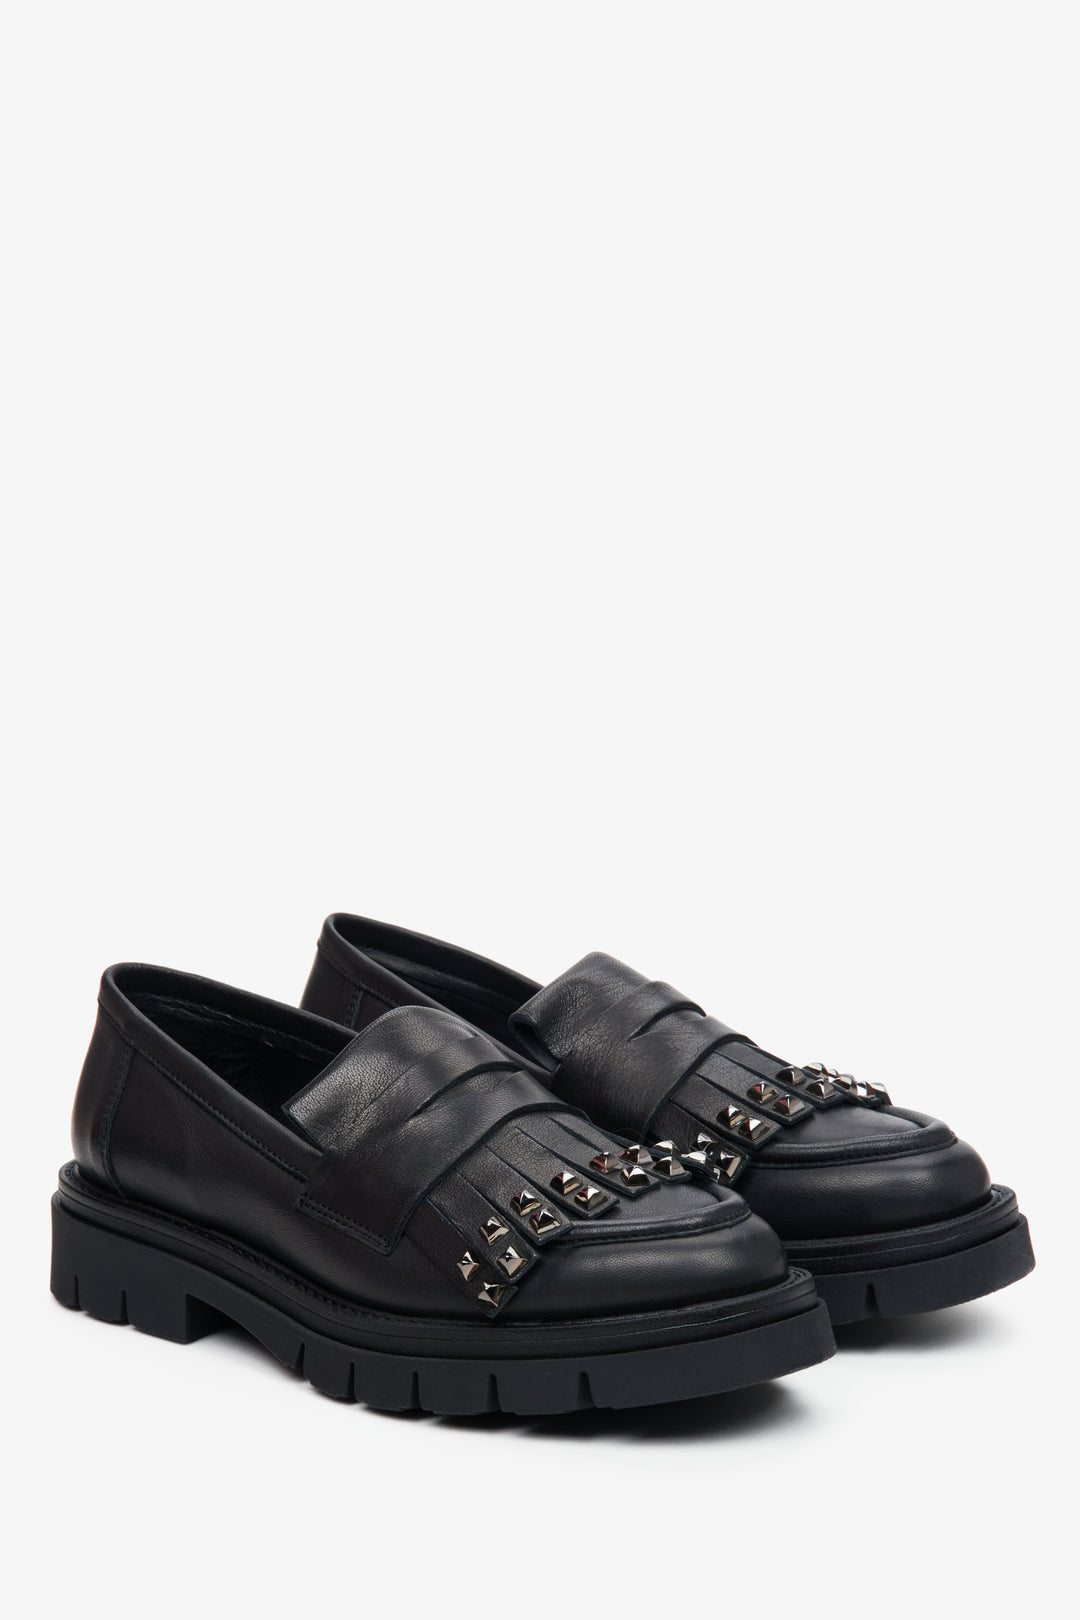 Women's black loafers made of Italian genuine leather by Estro.